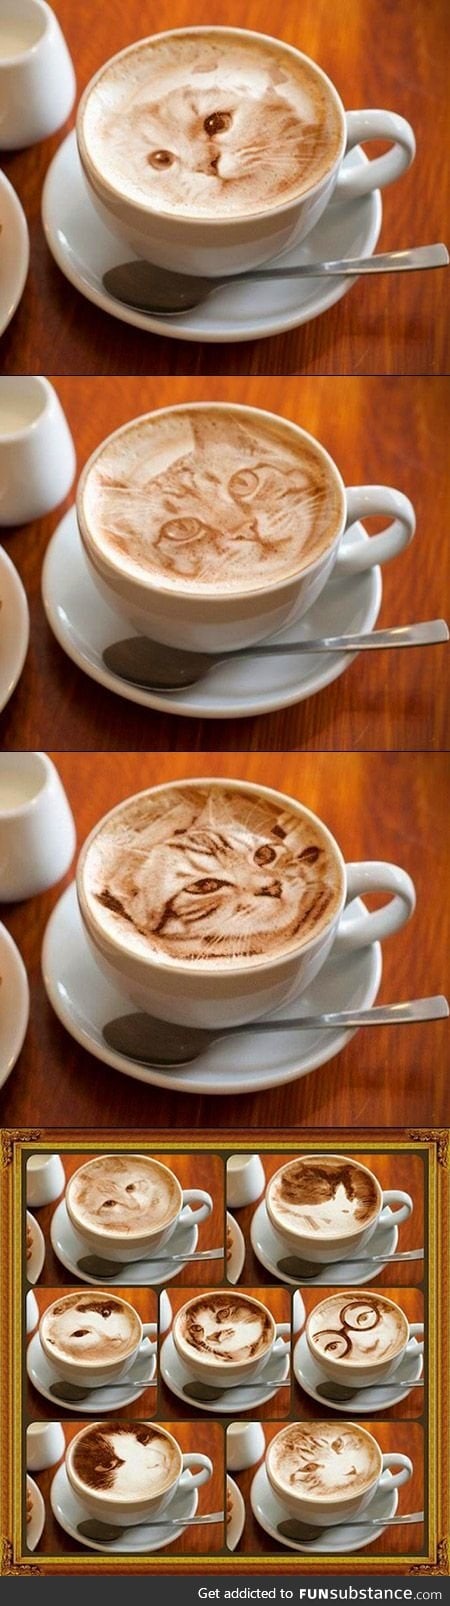 Cats always be getting into my latte...